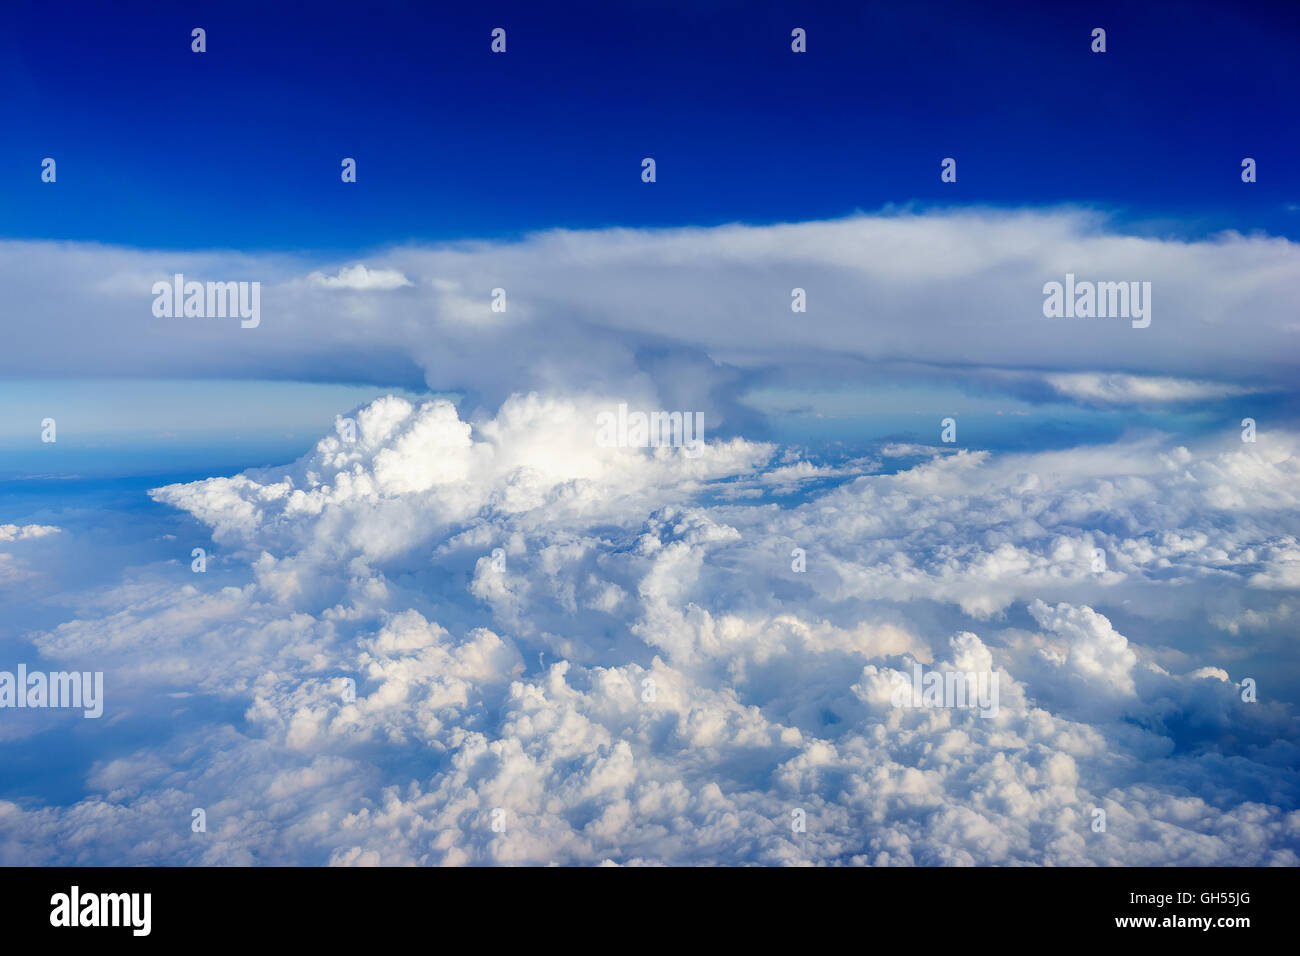 Blue sky with white clouds view from air plane Stock Photo